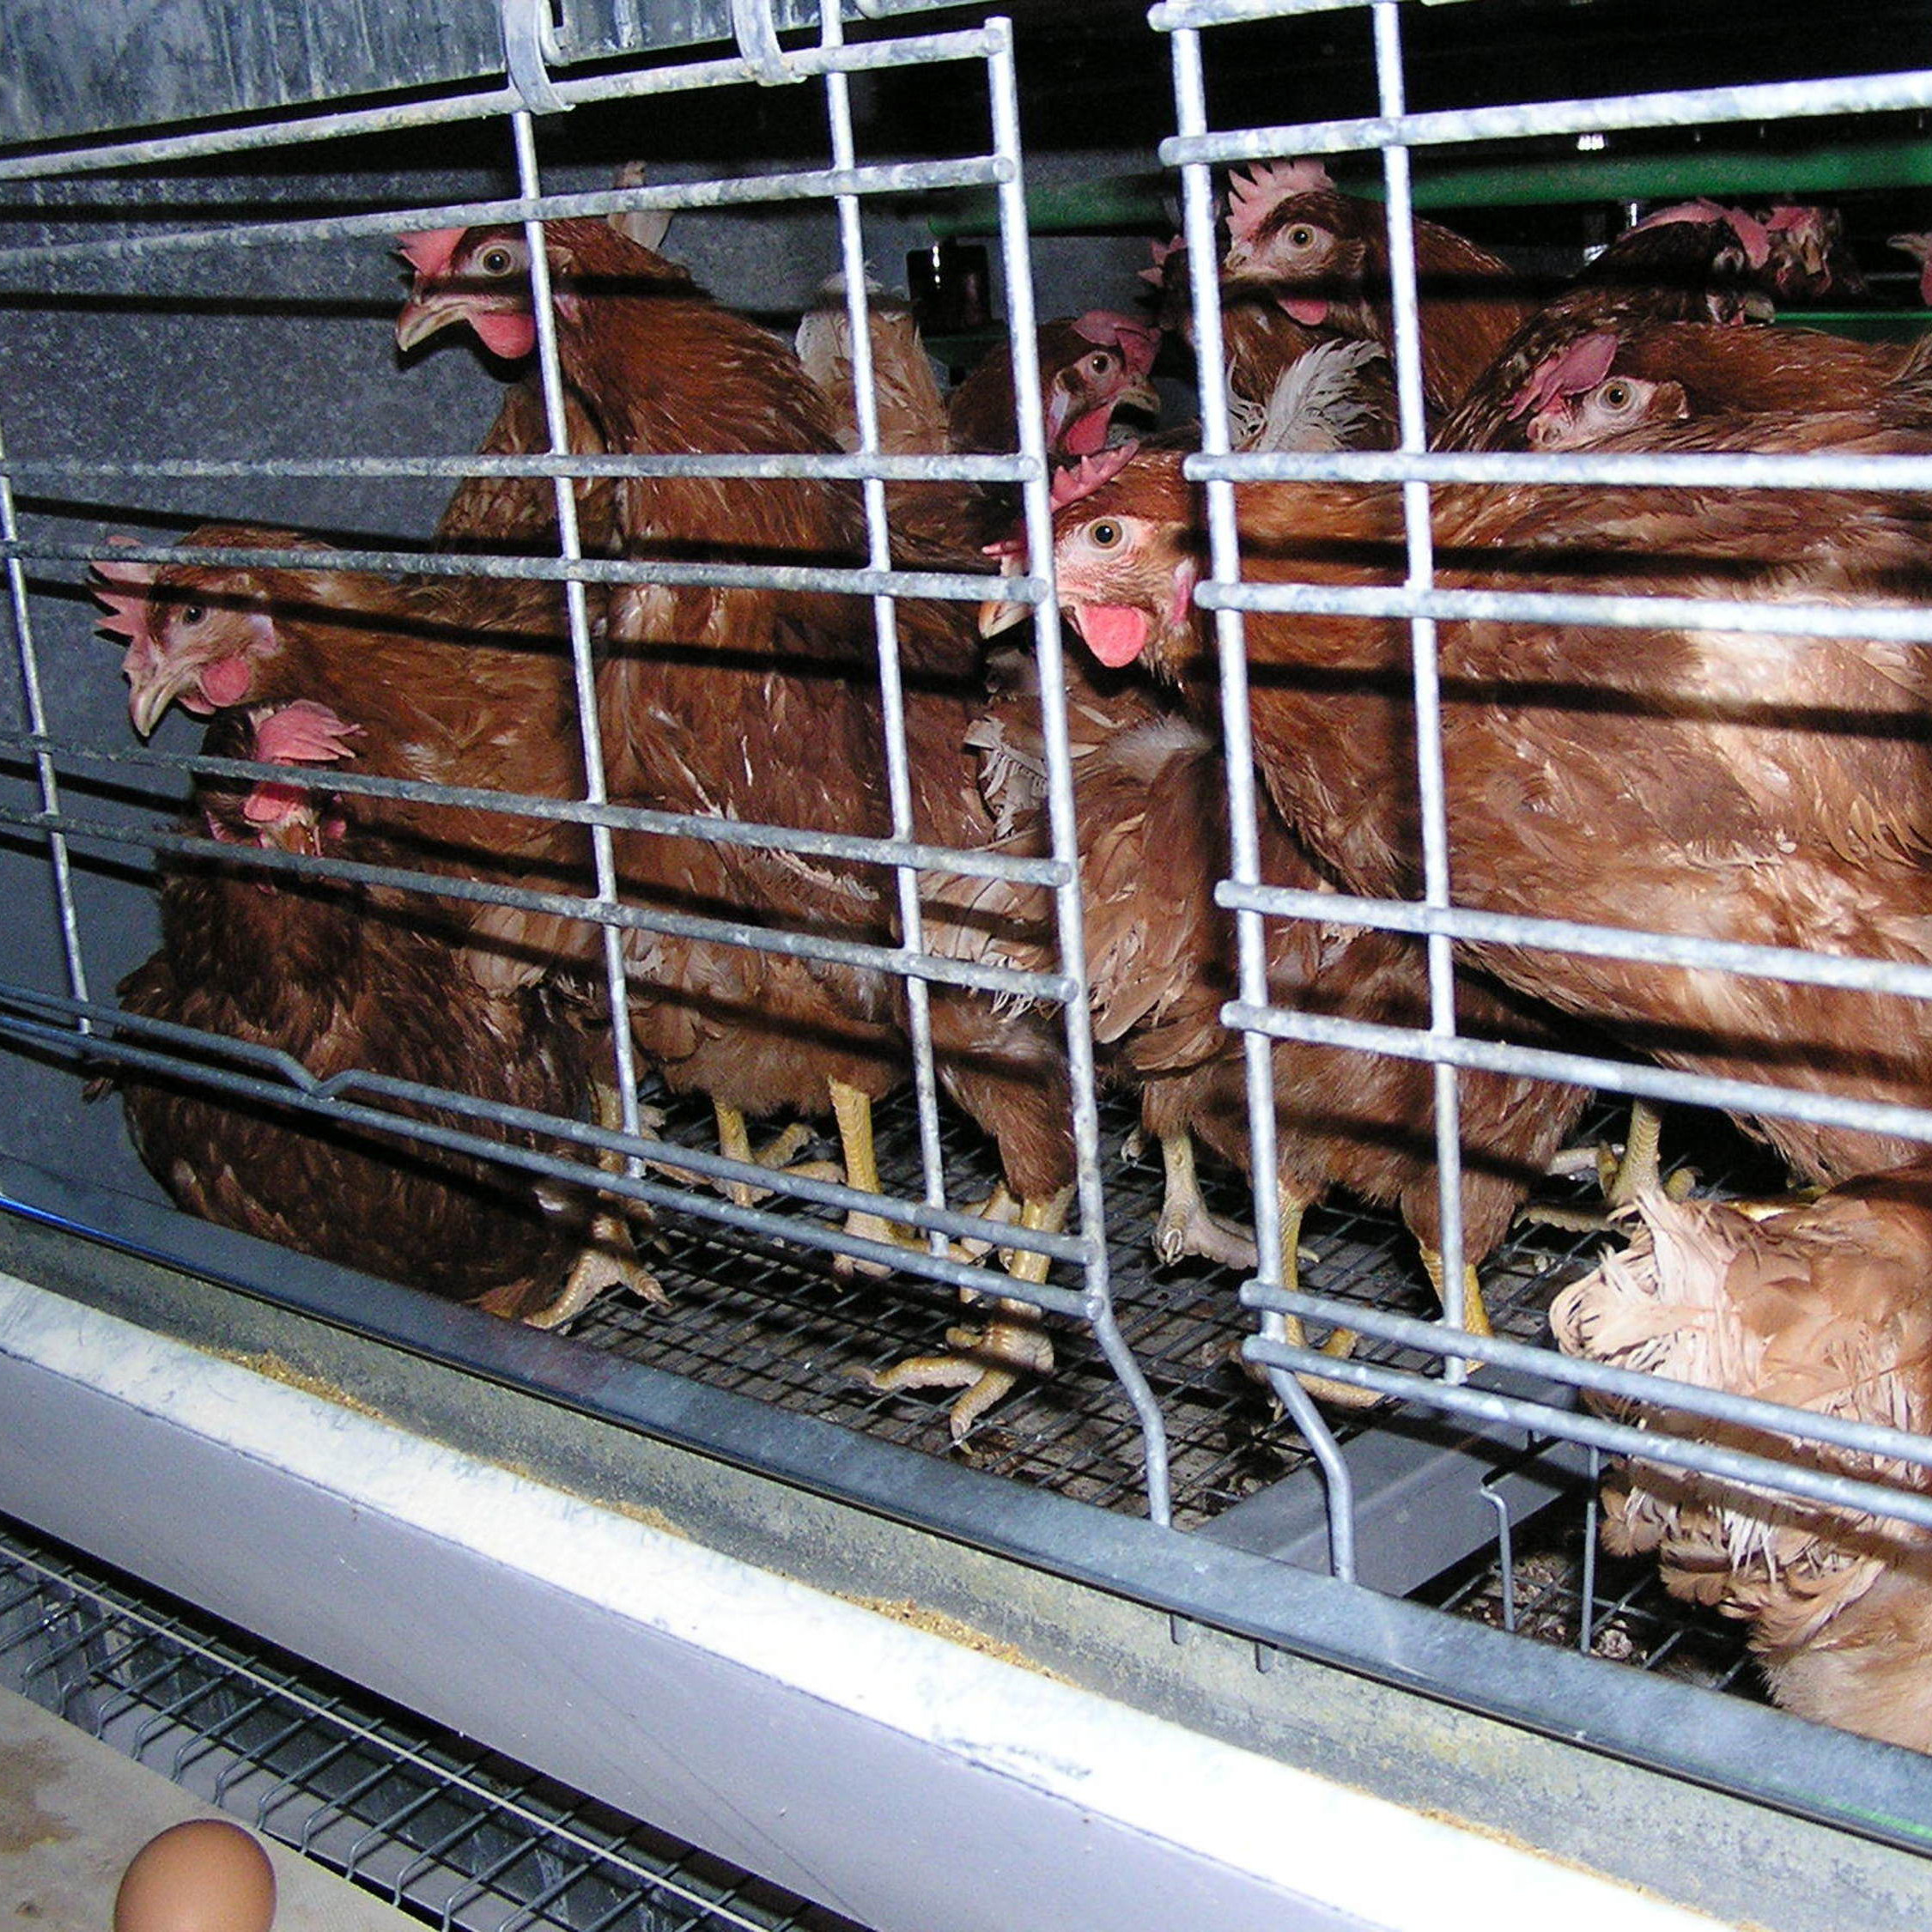 Laying hens in cages